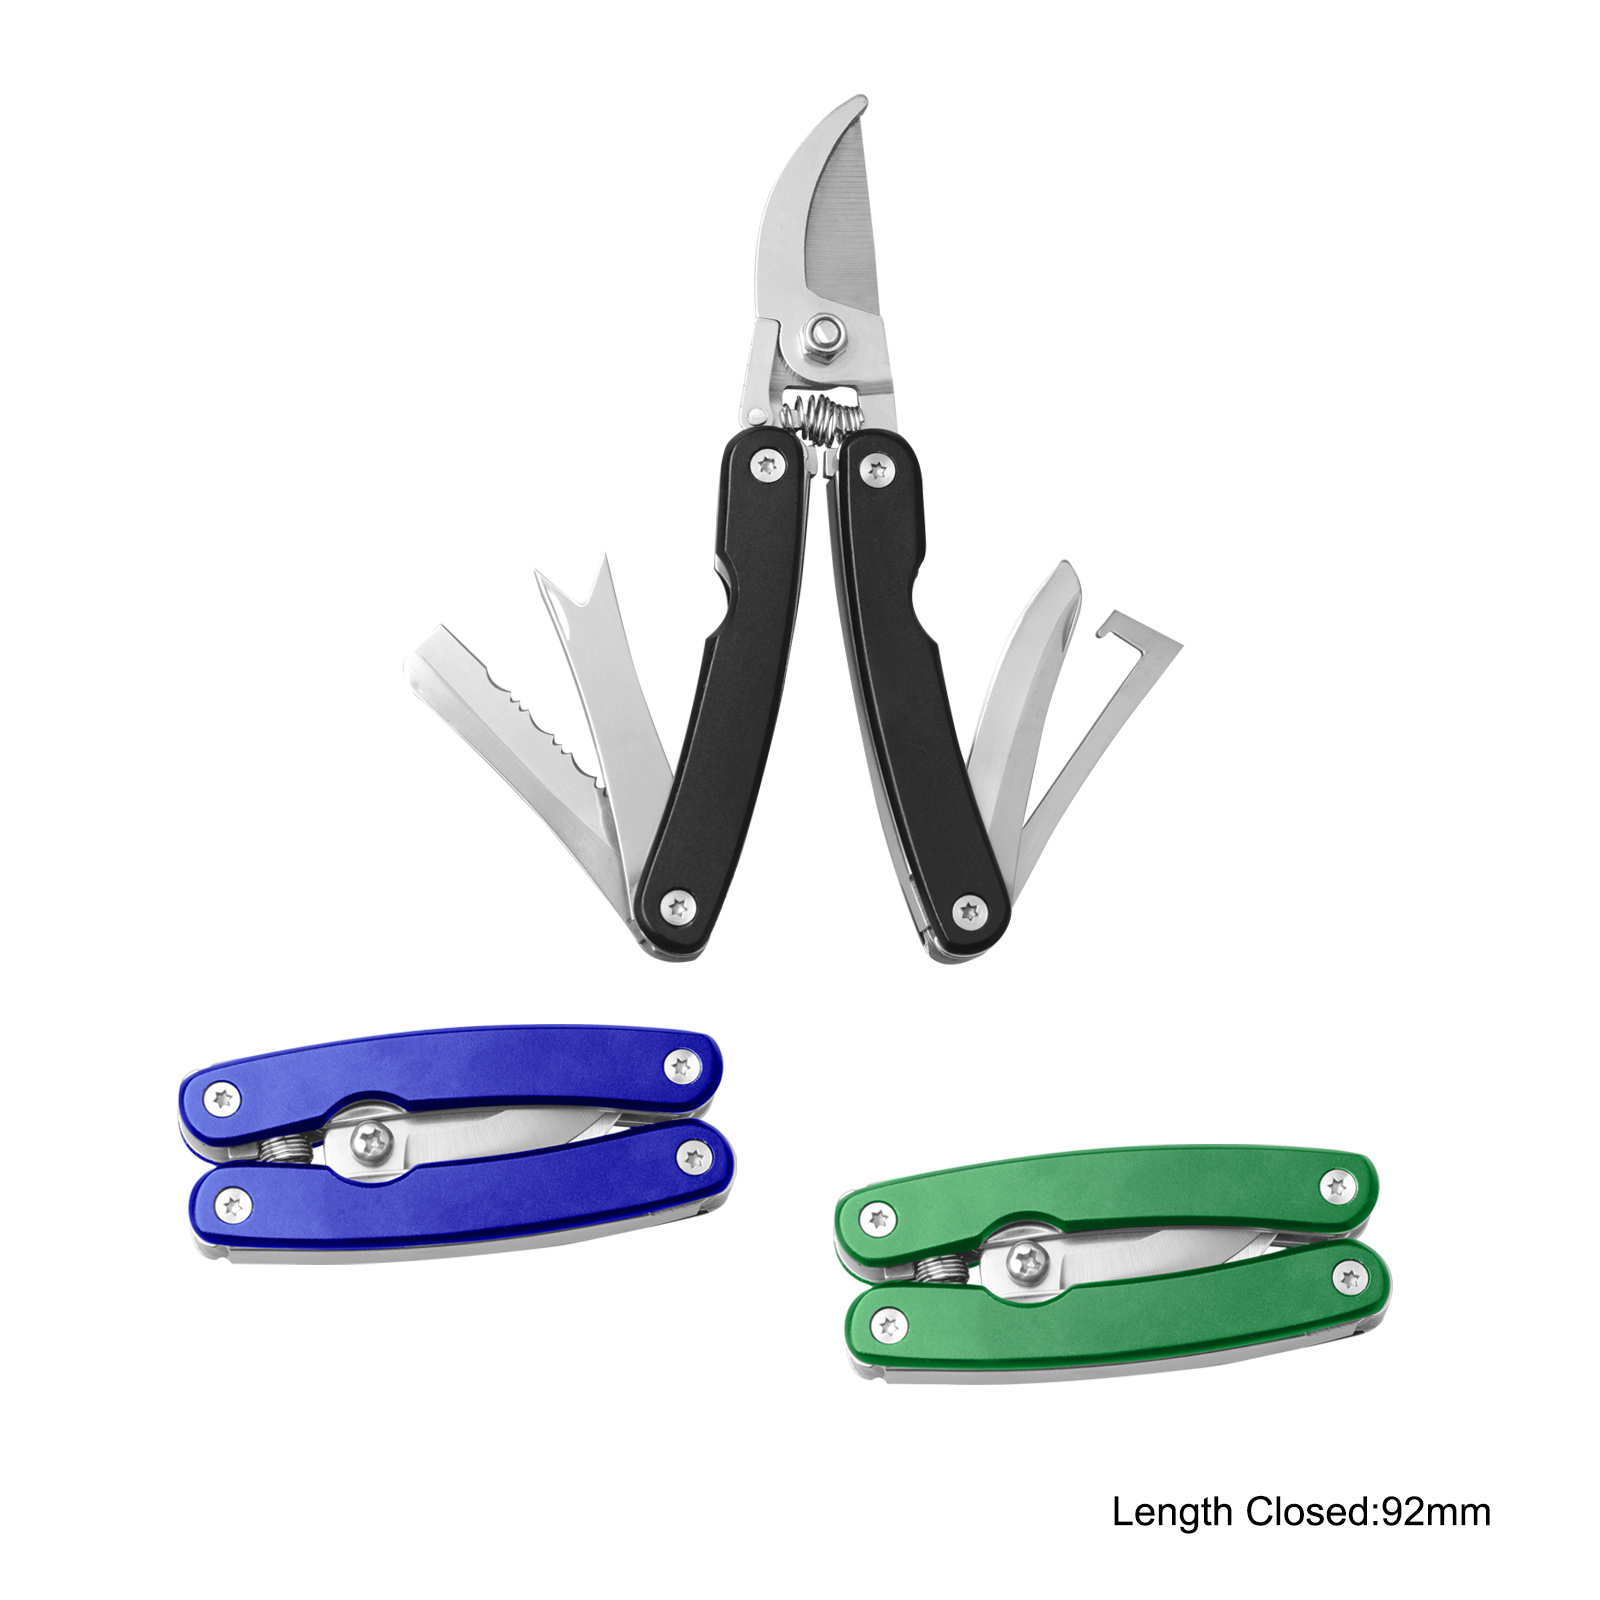 #8156 Multi Function Pruning Shears with Anodized Aluminum Handle